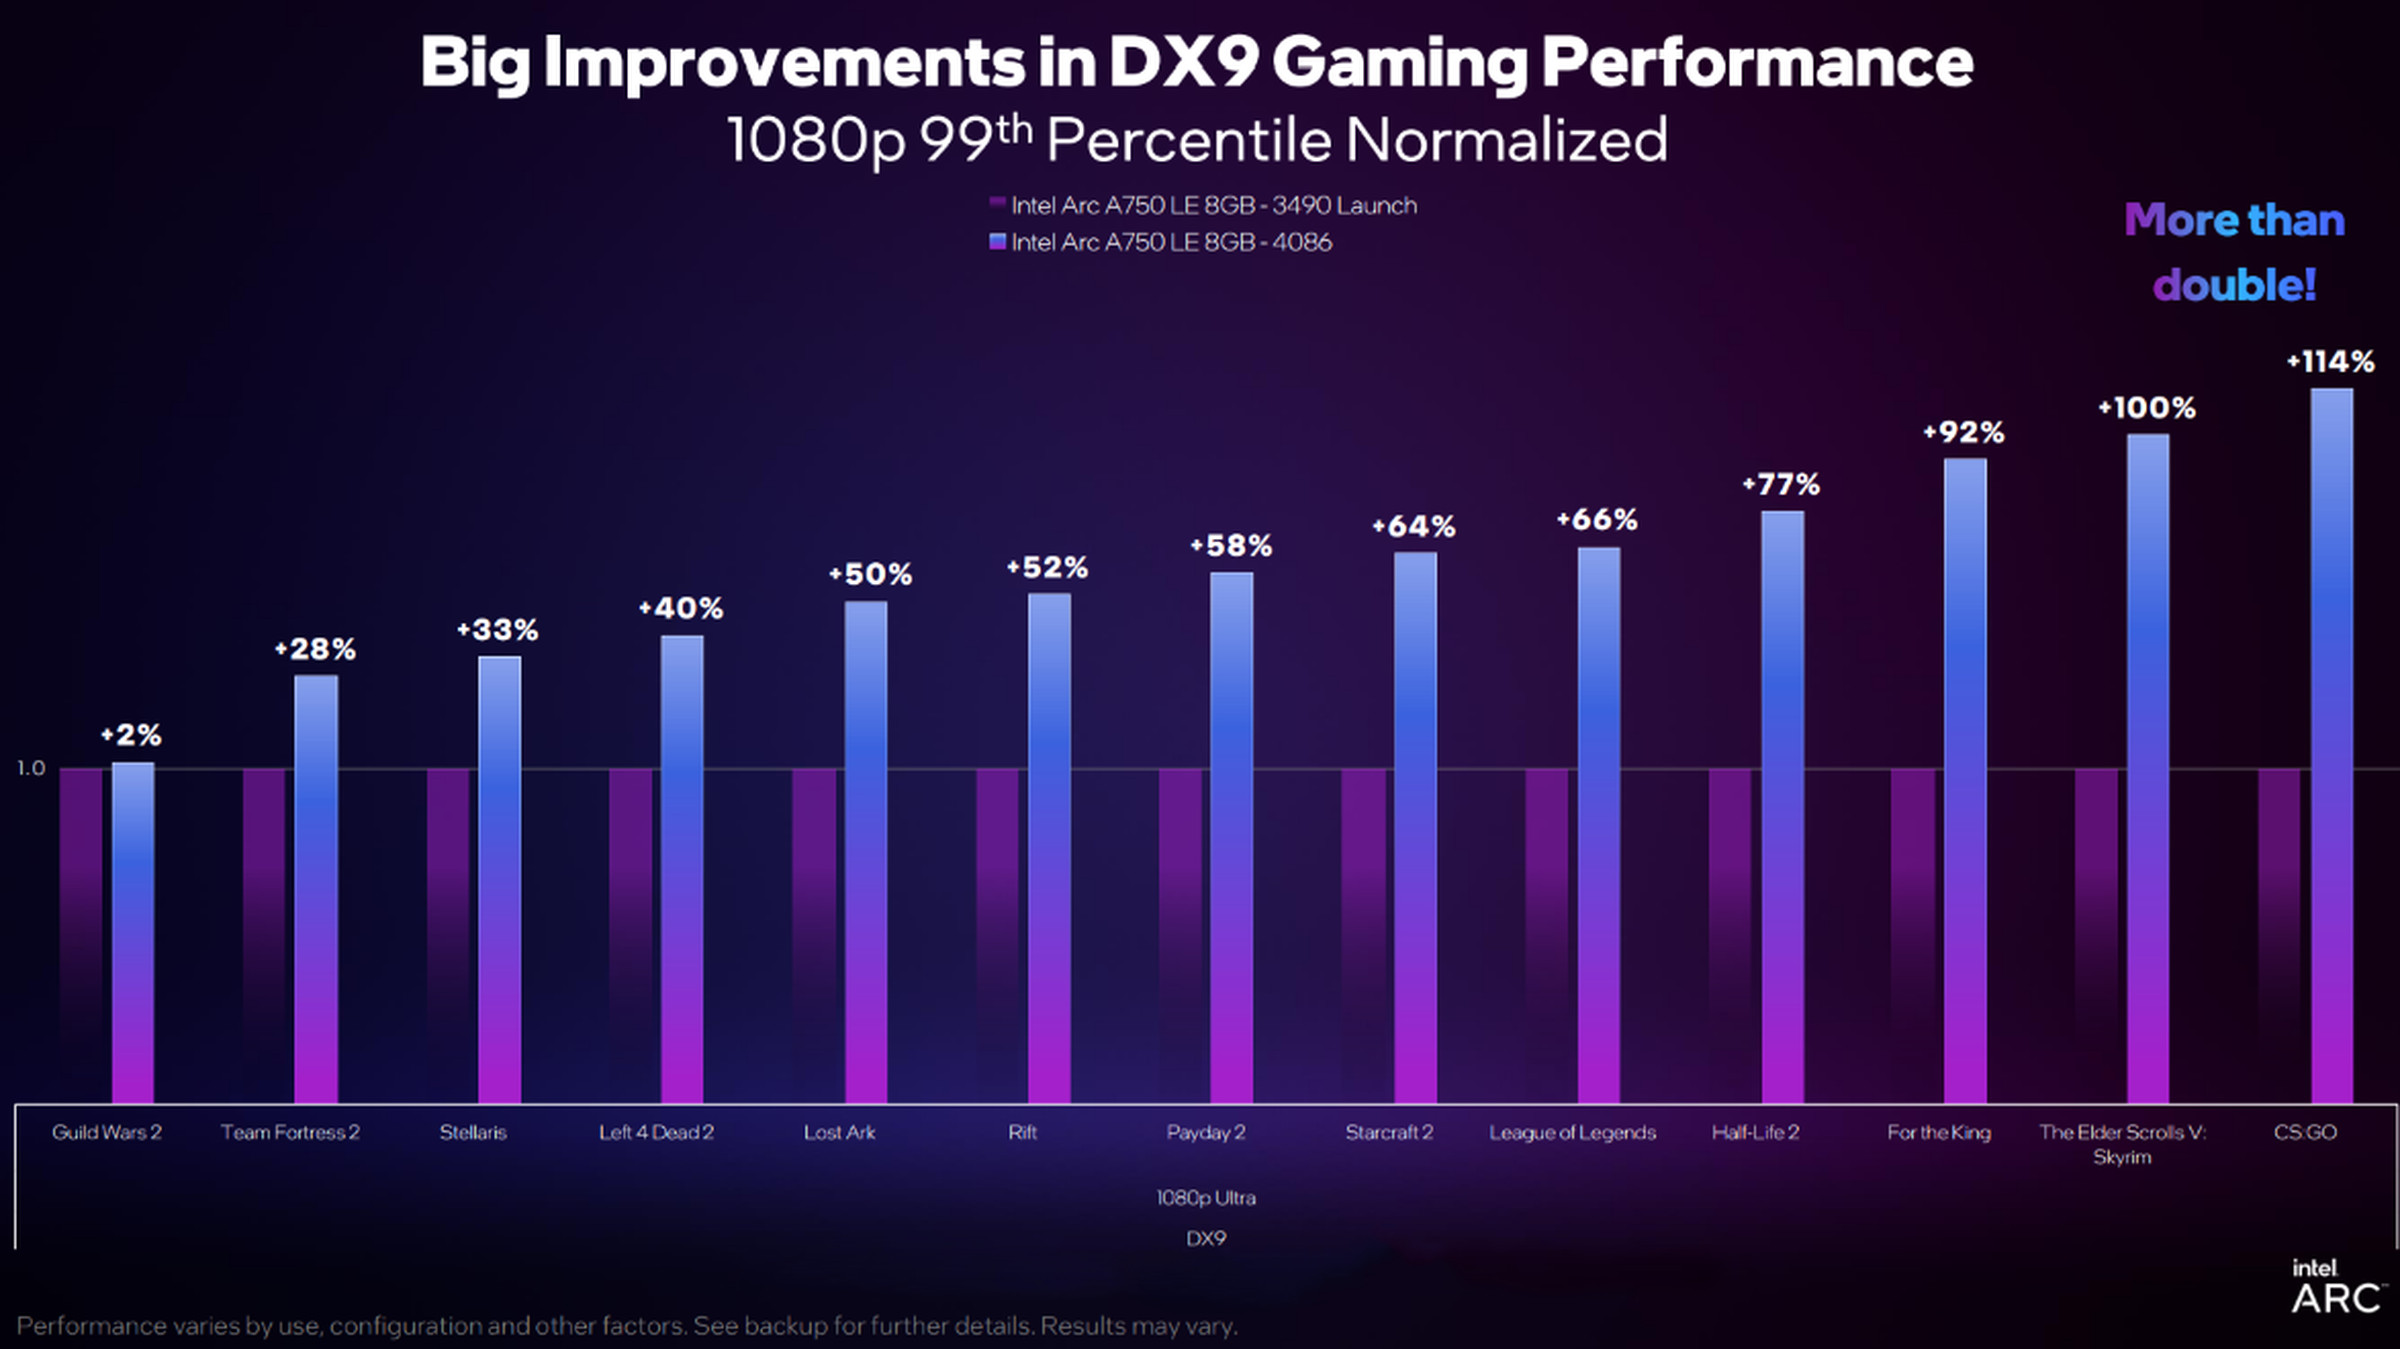 Performance in popular games like CS:GO should improve by more than double.